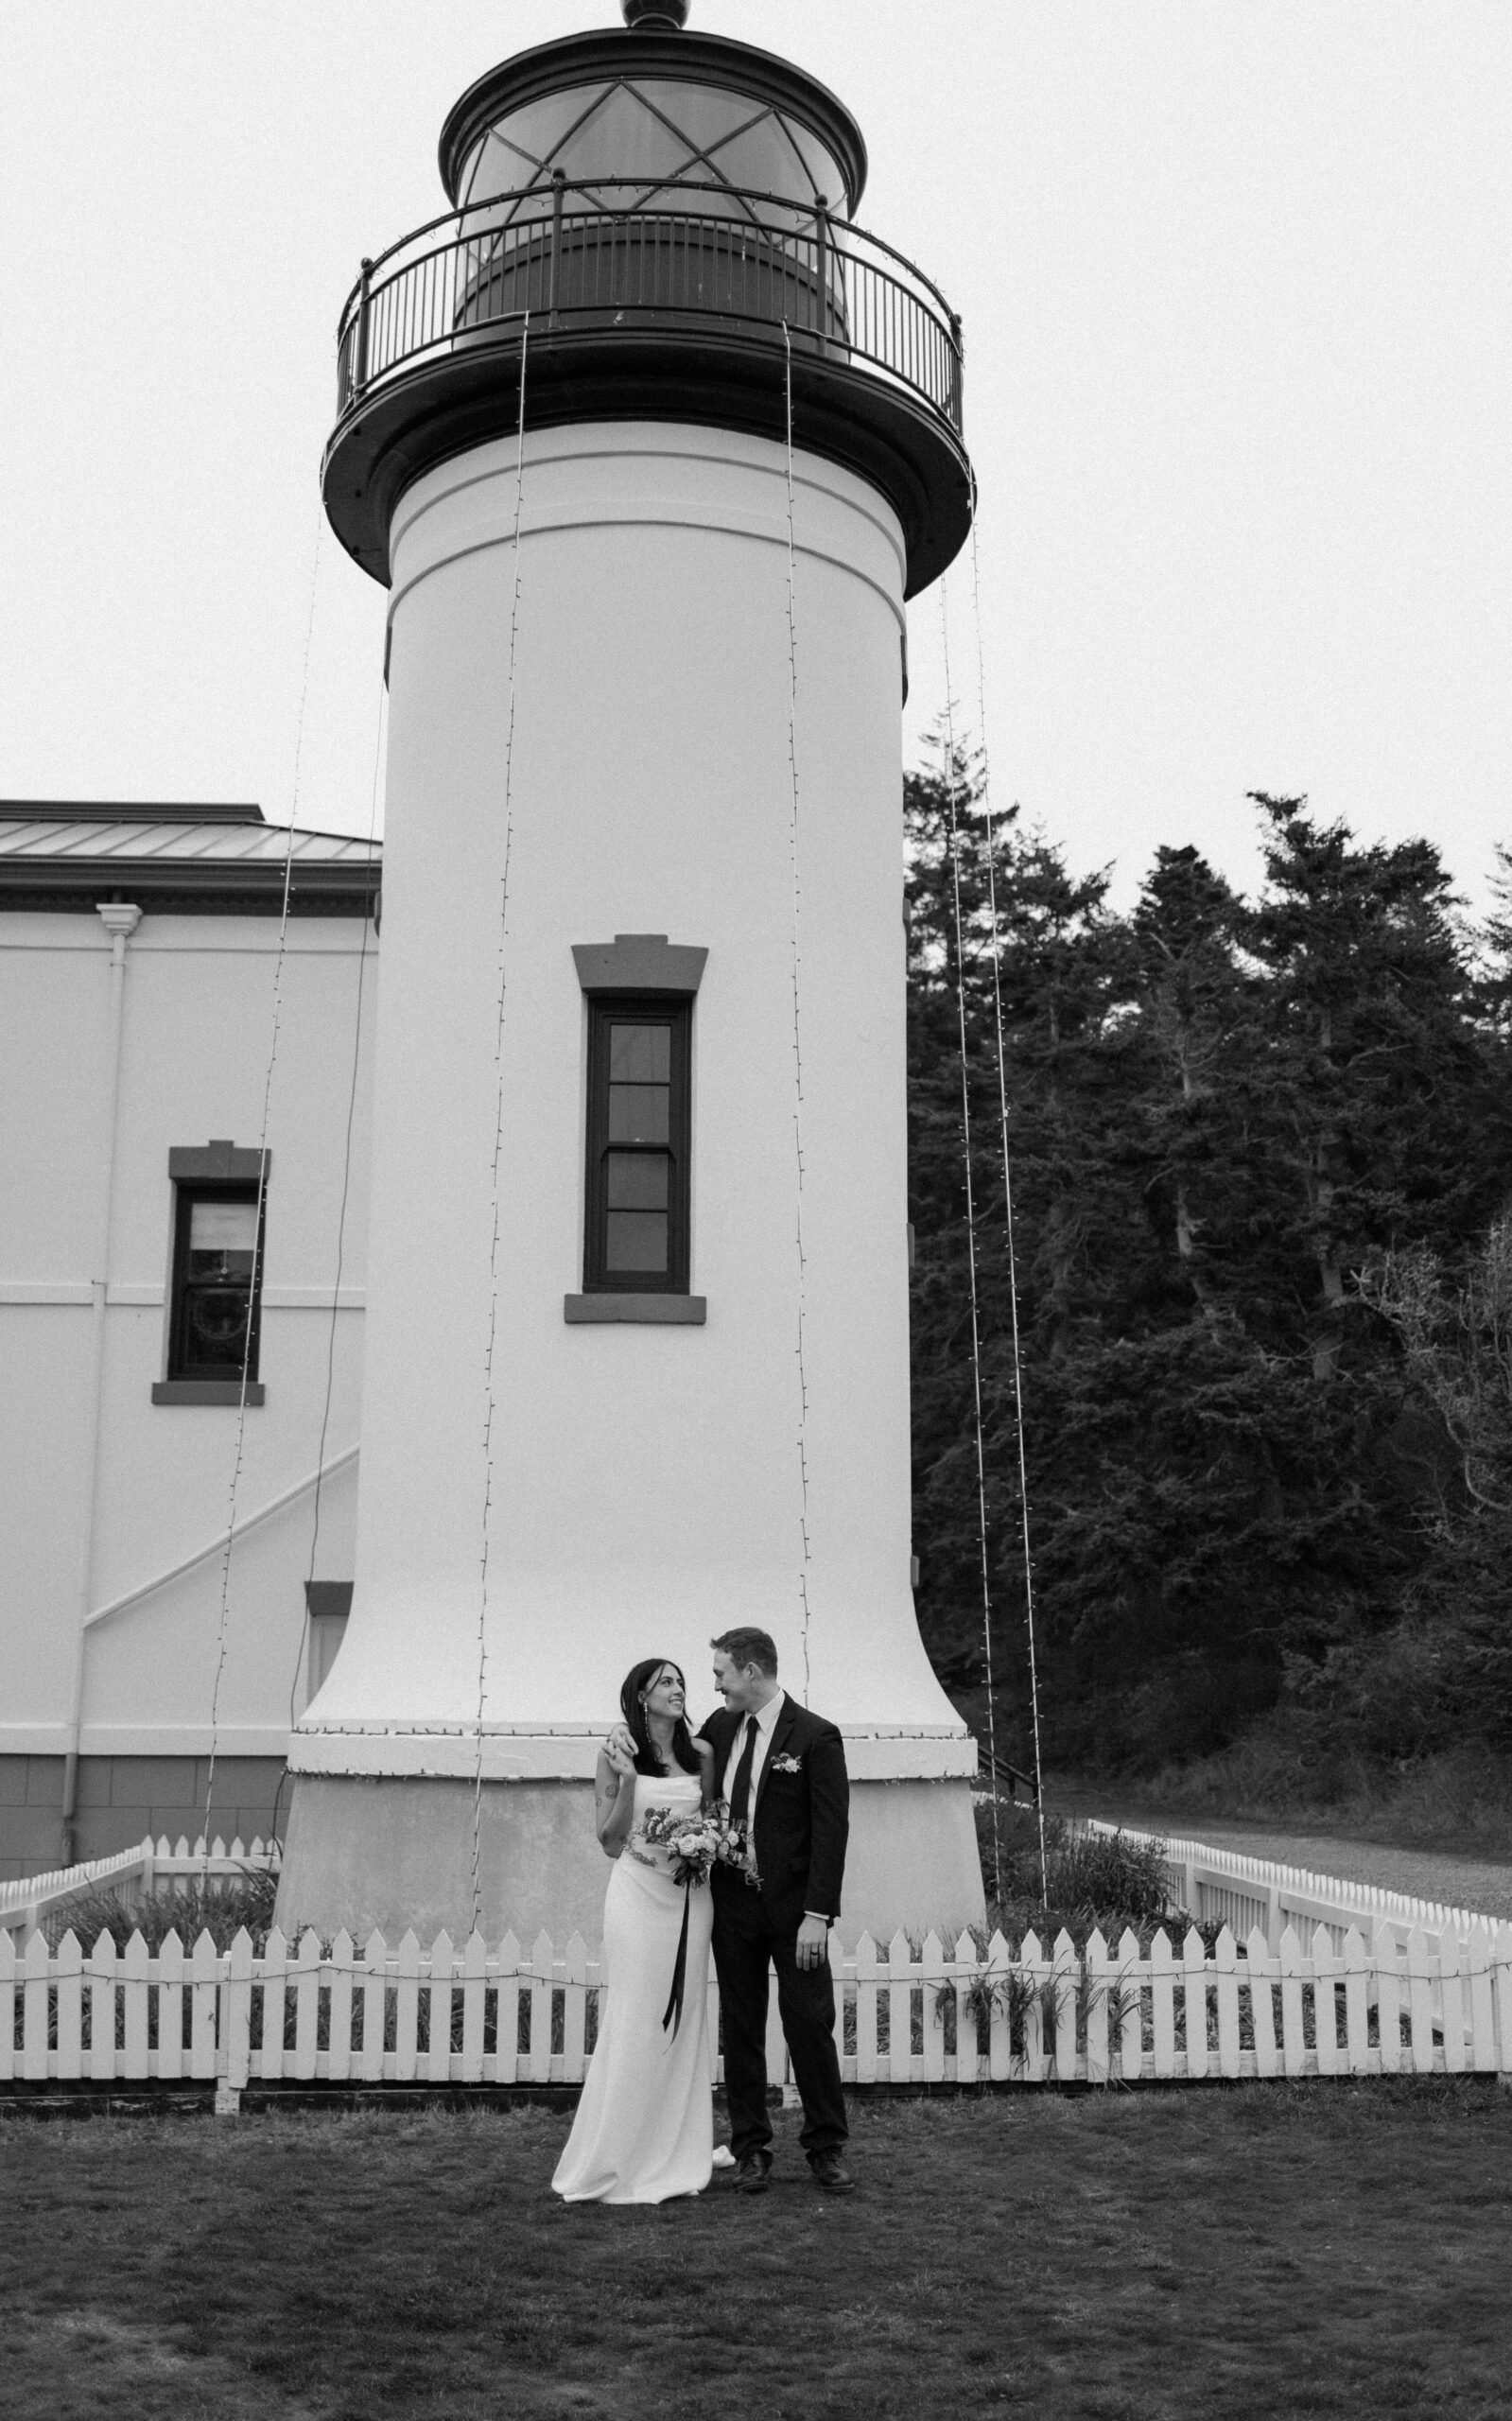 Bride and groom pose under lighthouse along Puget Sound in anti-bride elopement photos